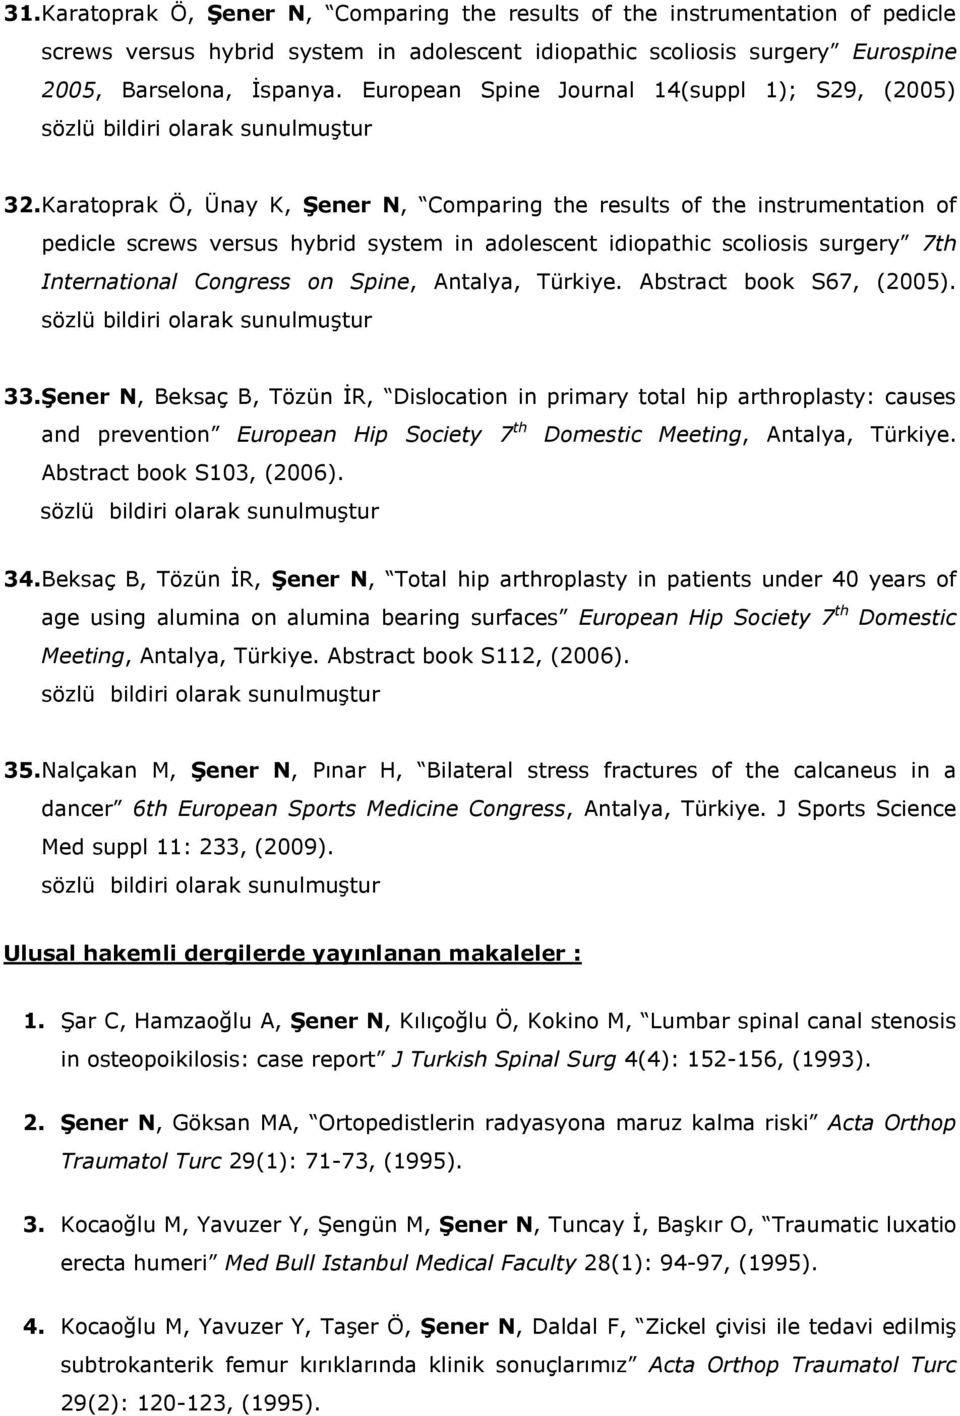 Karatoprak Ö, Ünay K, Şener N, Comparing the results of the instrumentation of pedicle screws versus hybrid system in adolescent idiopathic scoliosis surgery 7th International Congress on Spine,